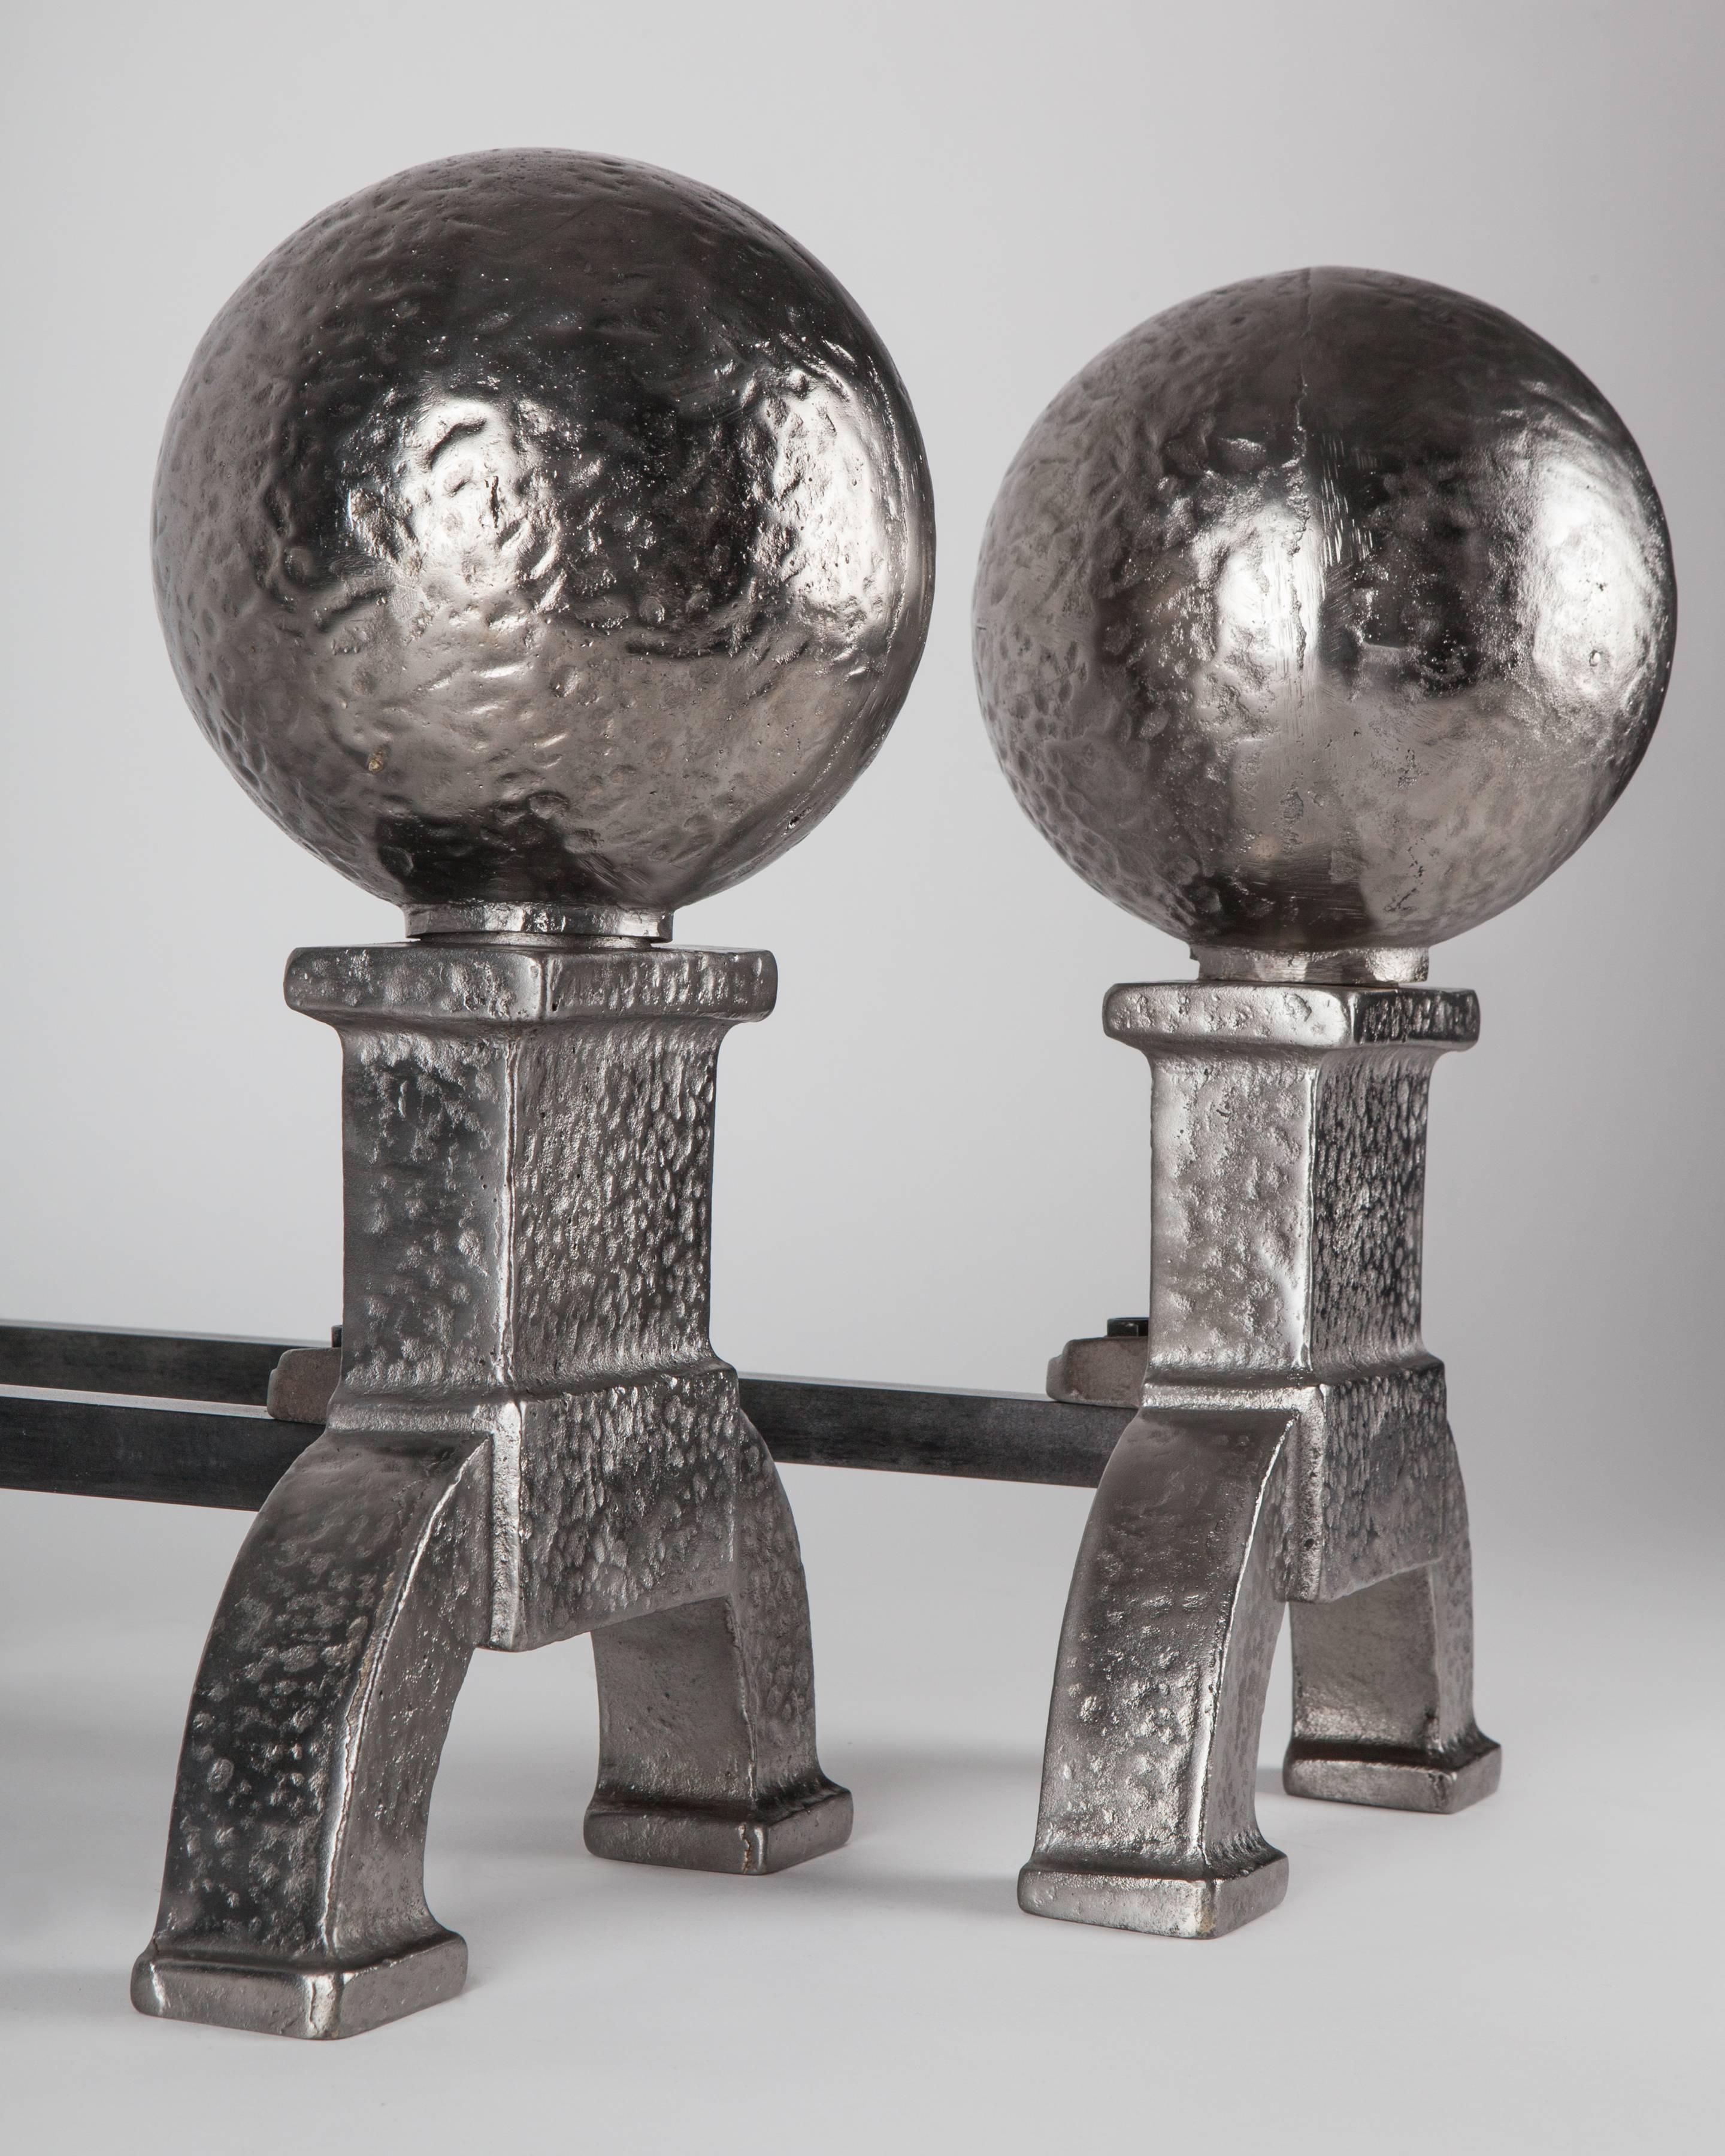 AFP0589
A pair of cast iron cannonball andirons in a brightened finish. Signed by the Connecticut maker Bradley and Hubbard.

Dimensions:
Overall: 14-1/2